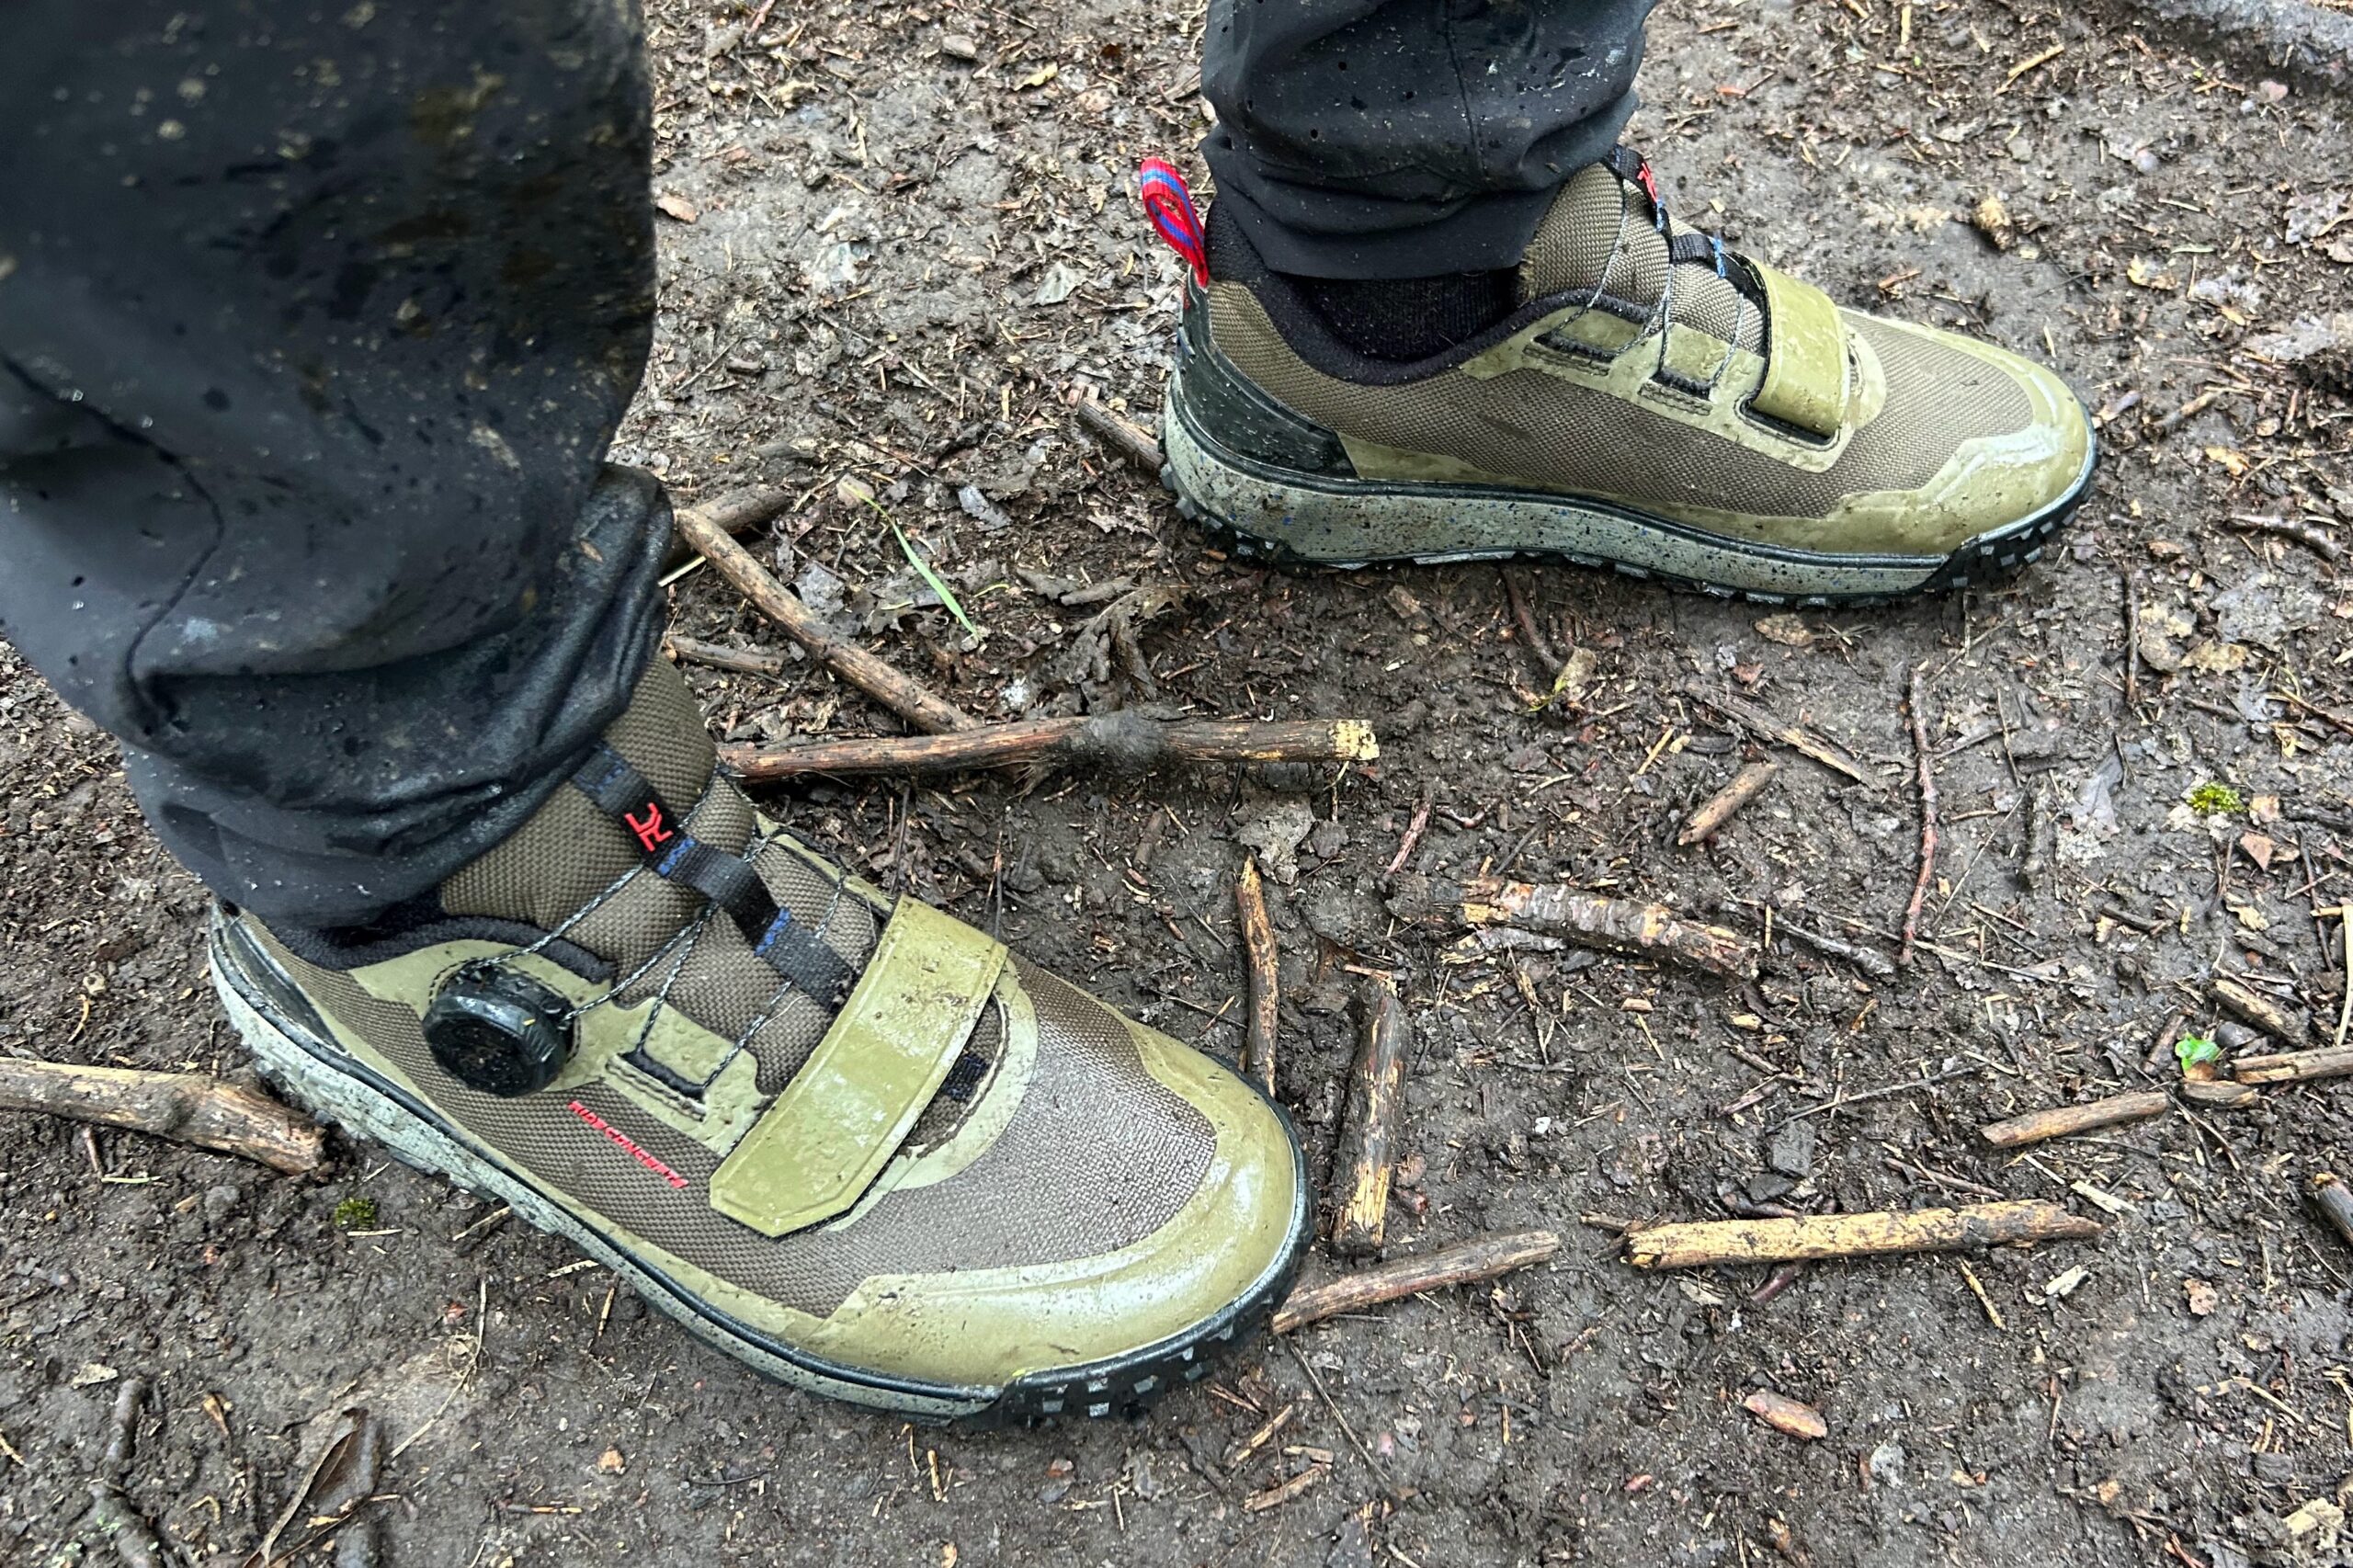 Ride Concepts Tallac Boa flat pedal shoes wet and muddy on a test ride